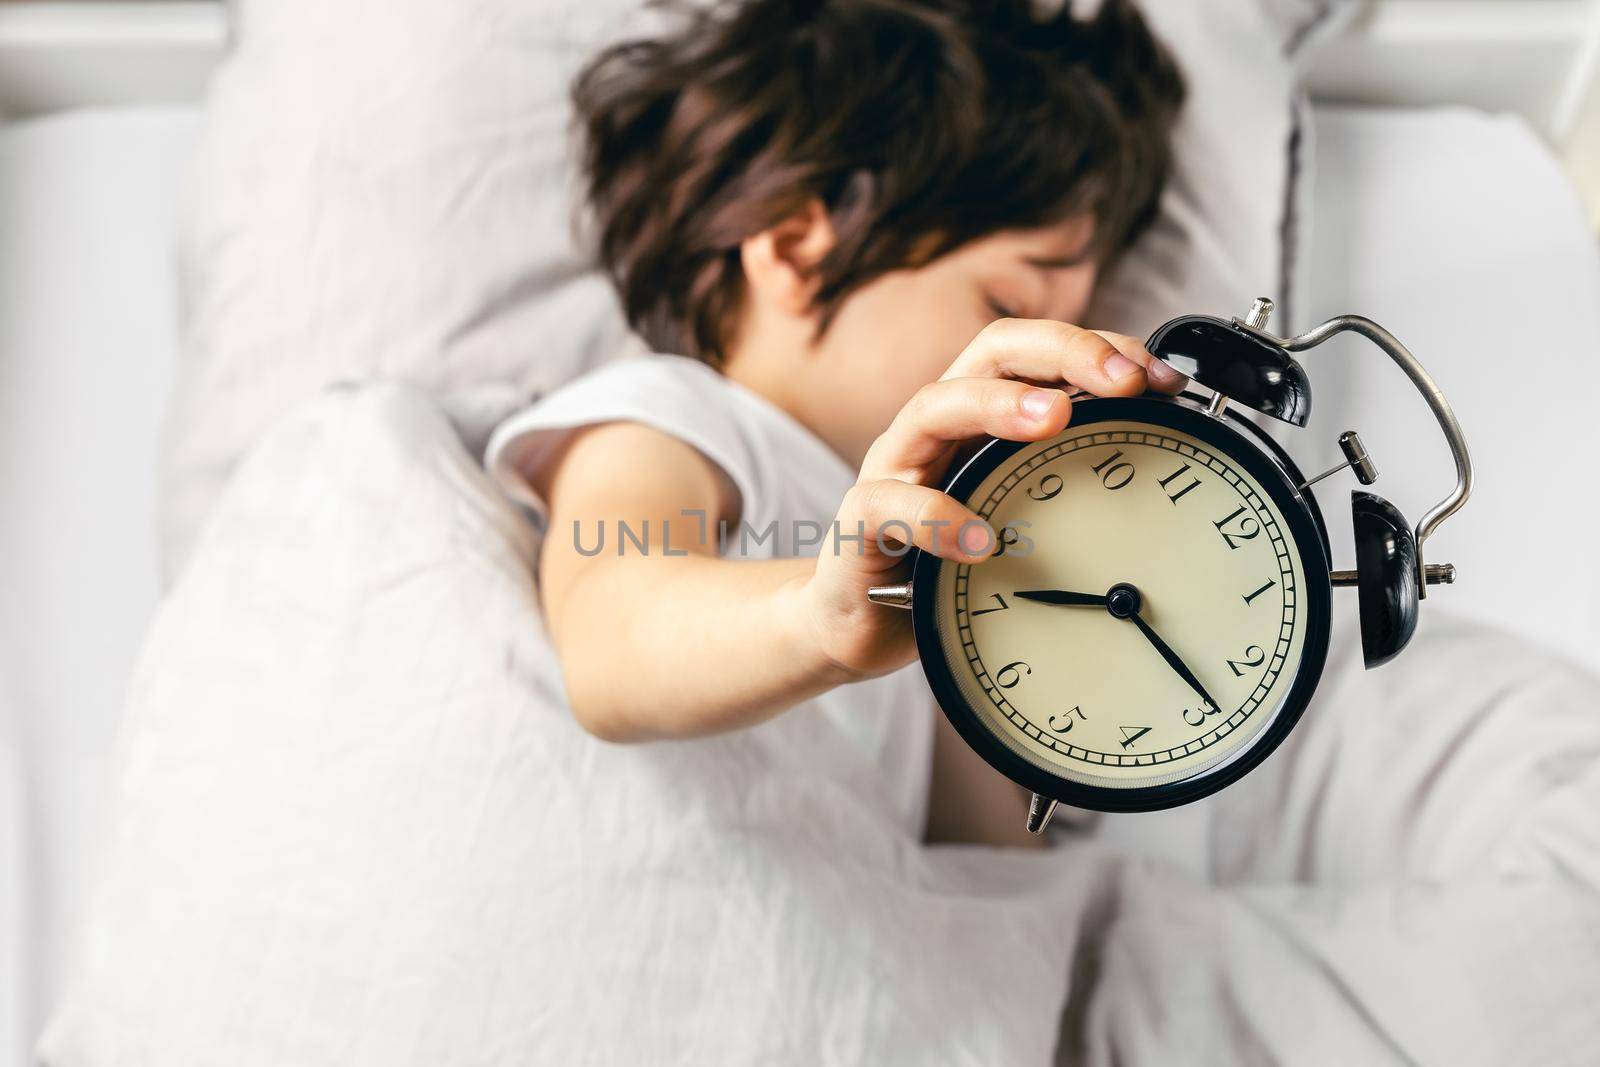 Boy holding alarm clock showing quarter past seven by Syvanych